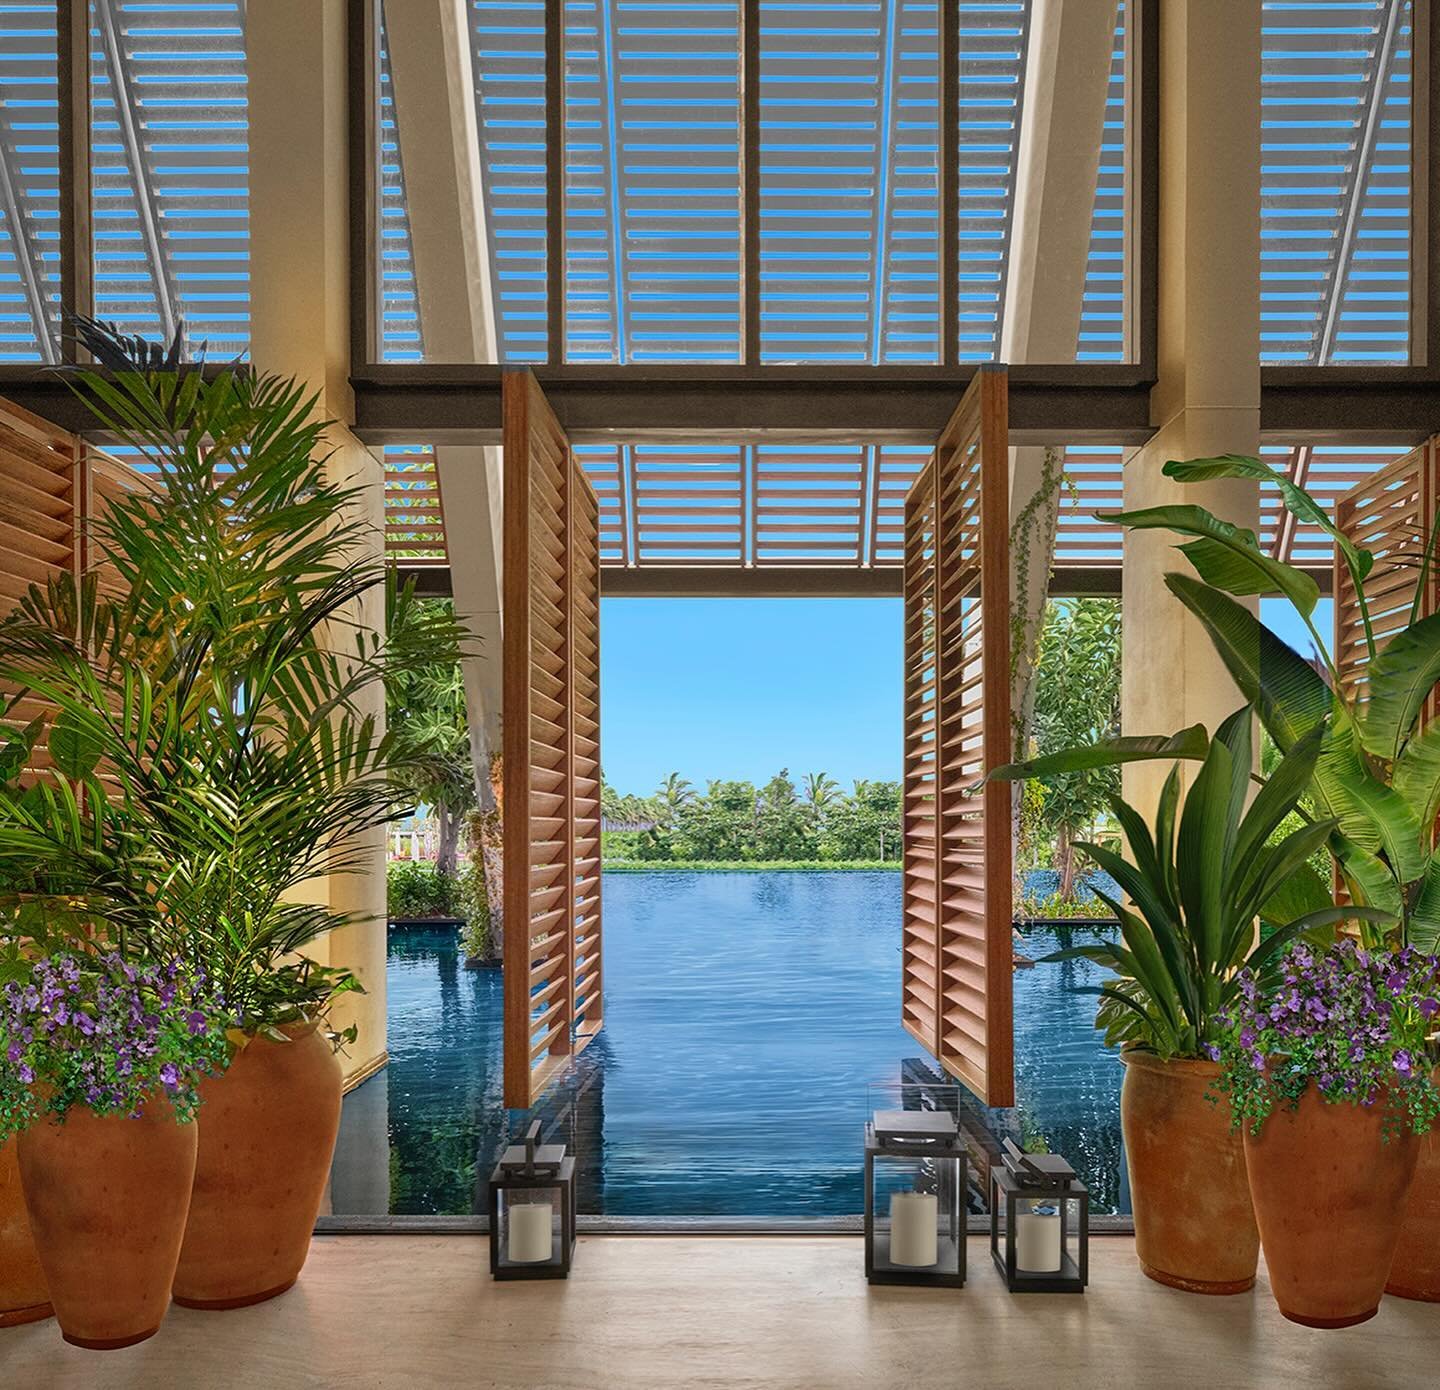 Introducing the stunning new @editionrivieramayakanai 

The property is situated on 620 acres in Kanai, the new hotspot luxury resort community. It features multiple infinity pools, a serene spa, and a beach club that takes beachfront dining to a new